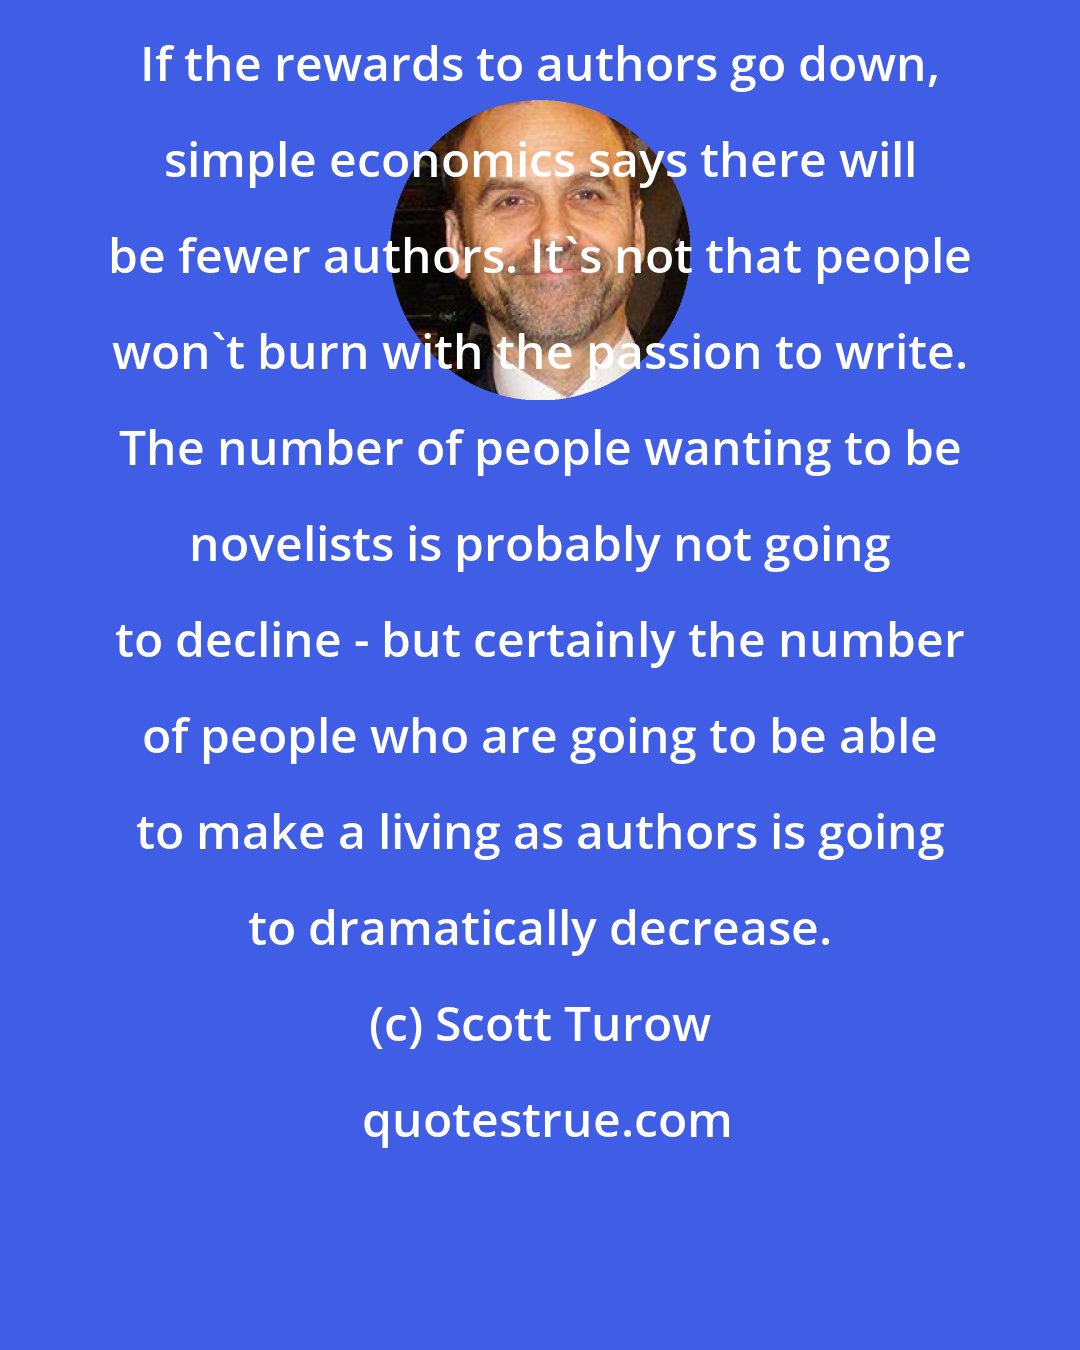 Scott Turow: If the rewards to authors go down, simple economics says there will be fewer authors. It's not that people won't burn with the passion to write. The number of people wanting to be novelists is probably not going to decline - but certainly the number of people who are going to be able to make a living as authors is going to dramatically decrease.